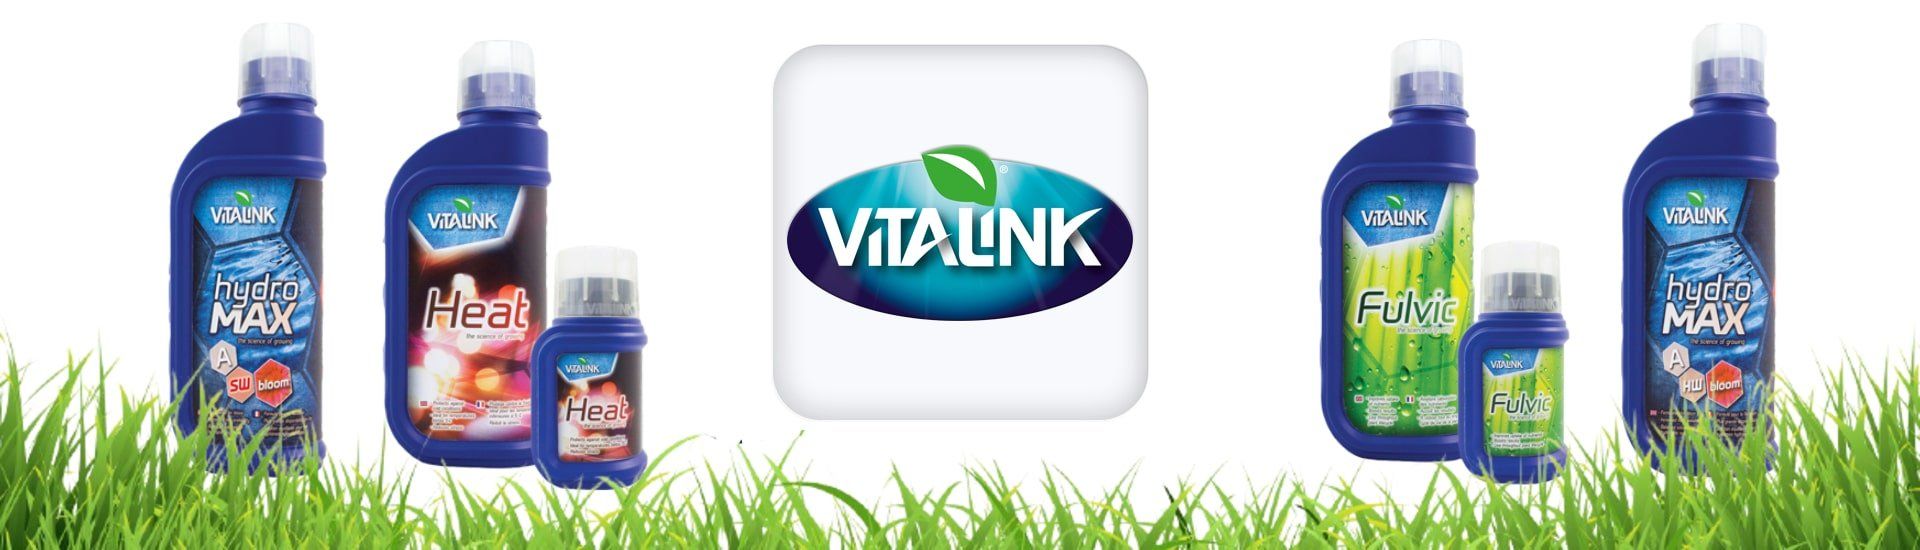 Made in the UK, VitaLink is a range of plant nutrients, additives and growing media for use in both hydroponic systems and soil. Whether you’re just starting out in growing or you’re an expert, the VitaLink range will help you achieve the best possible plant health, growth and yield.